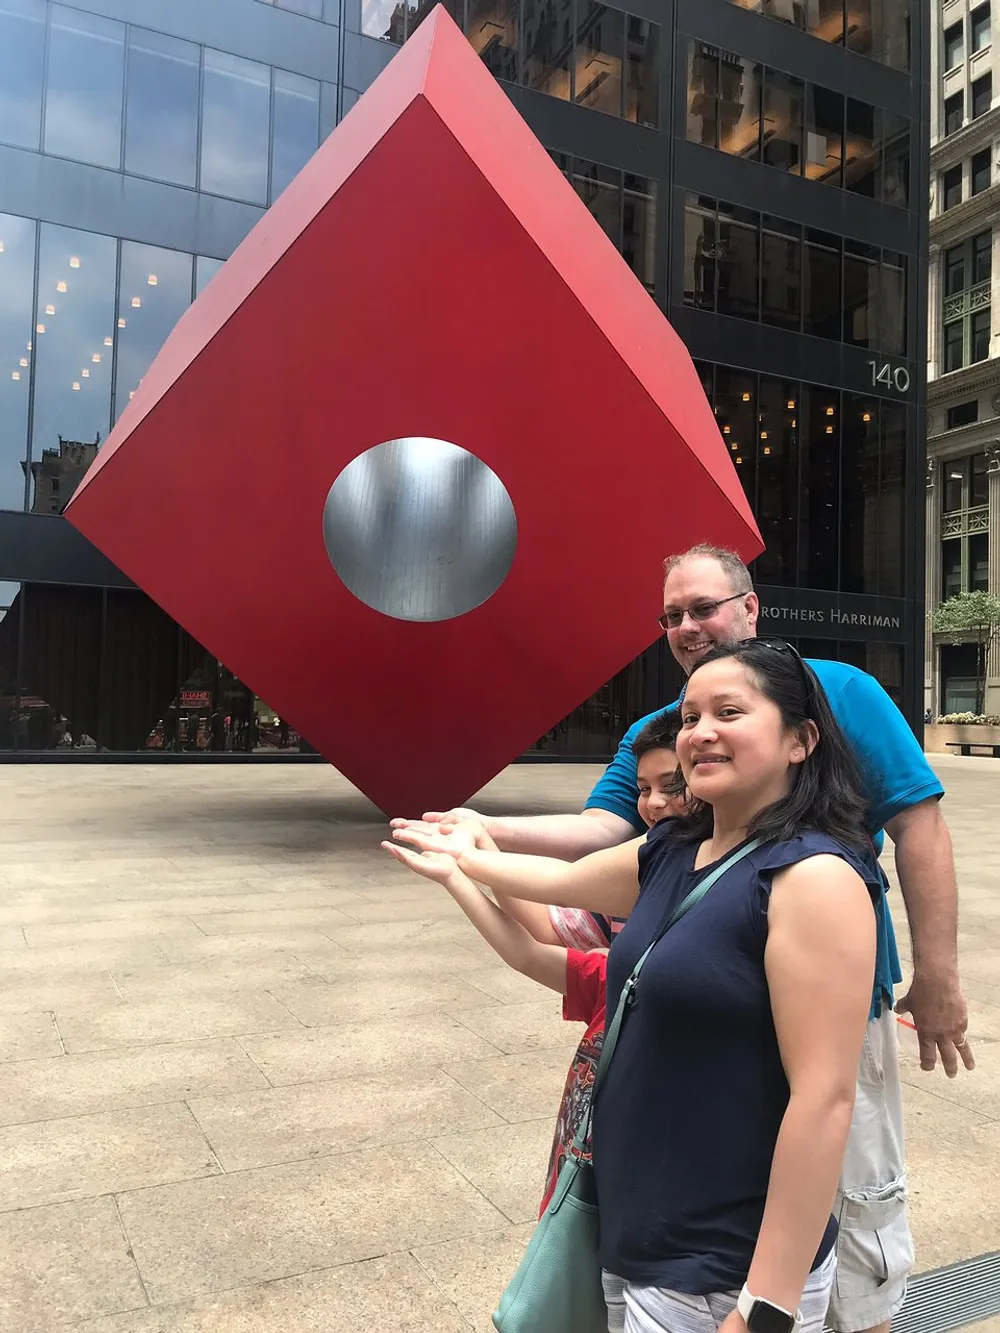 Three people pose as if they are holding up a large red cube-shaped sculpture with a circular cut-out in an urban plaza